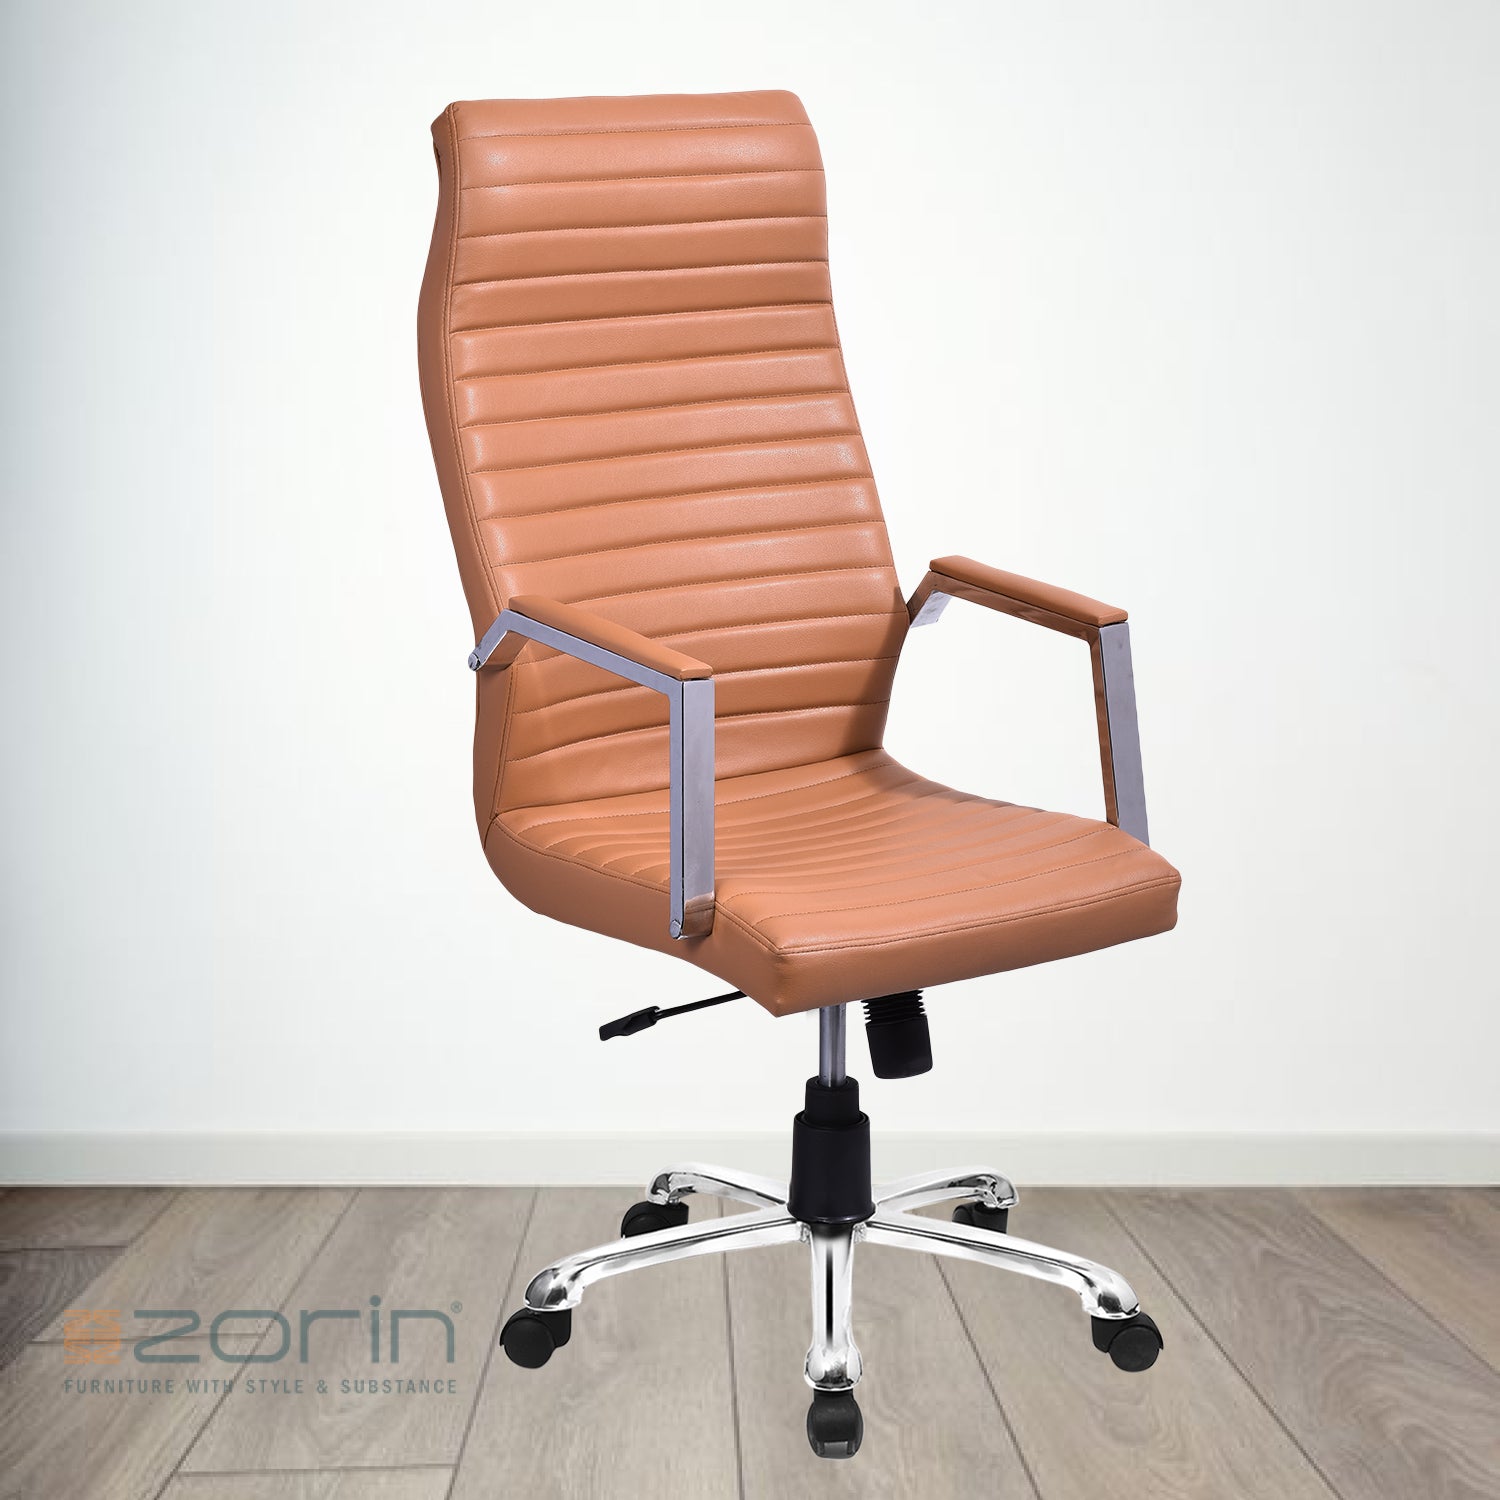 ZSE1040 High Back Chair by Zorin in Tan Color Zorin